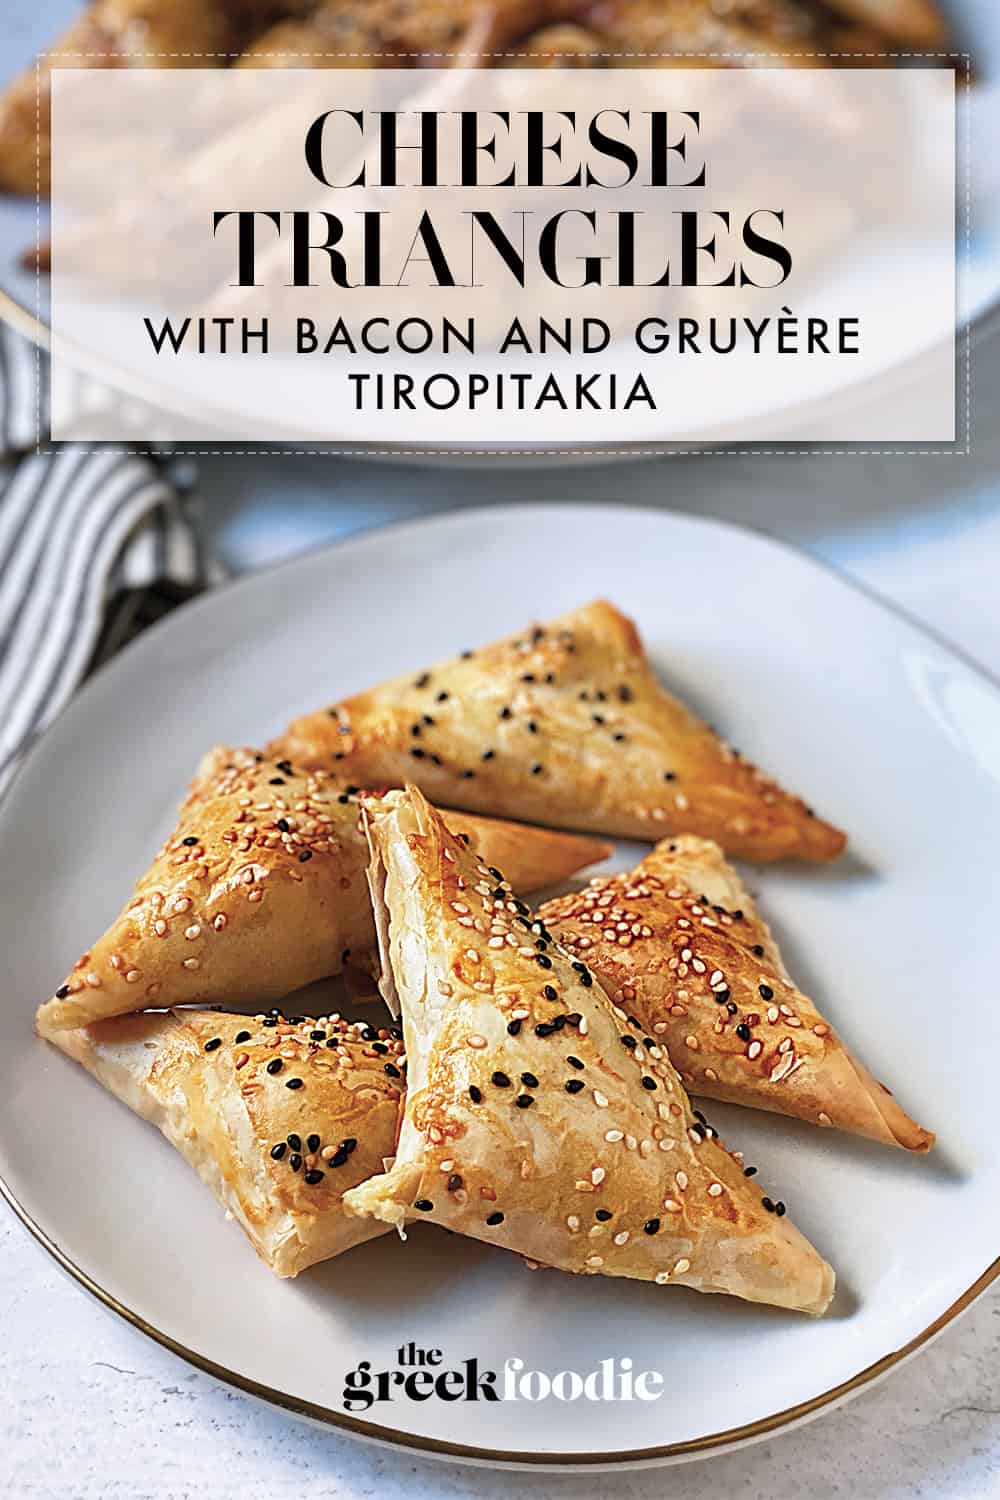 Cheese Triangles with Bacon and Gruyère - Tiropitakia